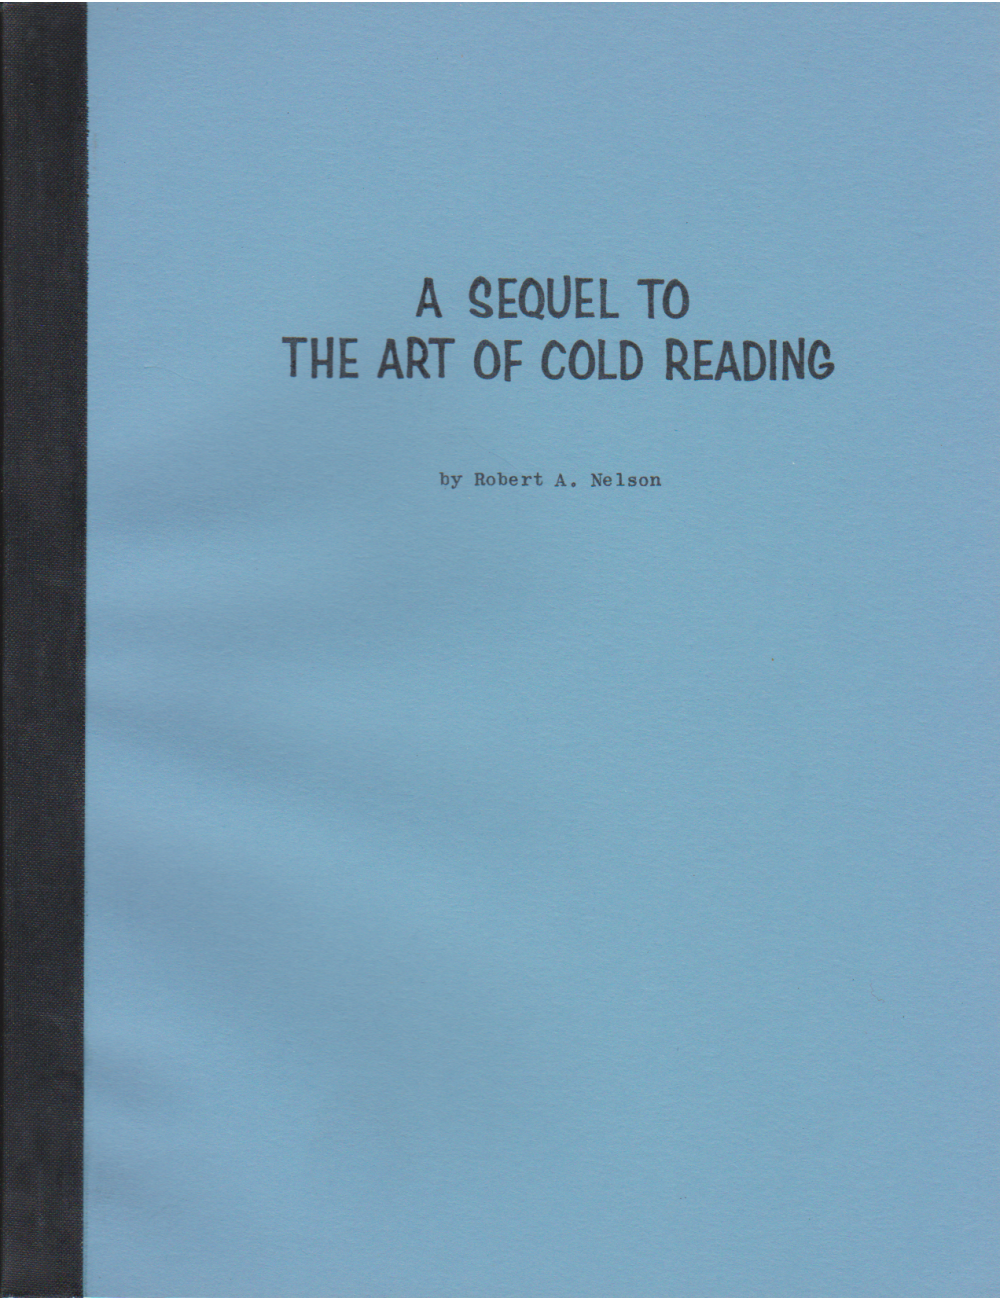 A SEQUEL TO THE ART OF COLD READING (Robert A. Nelson)